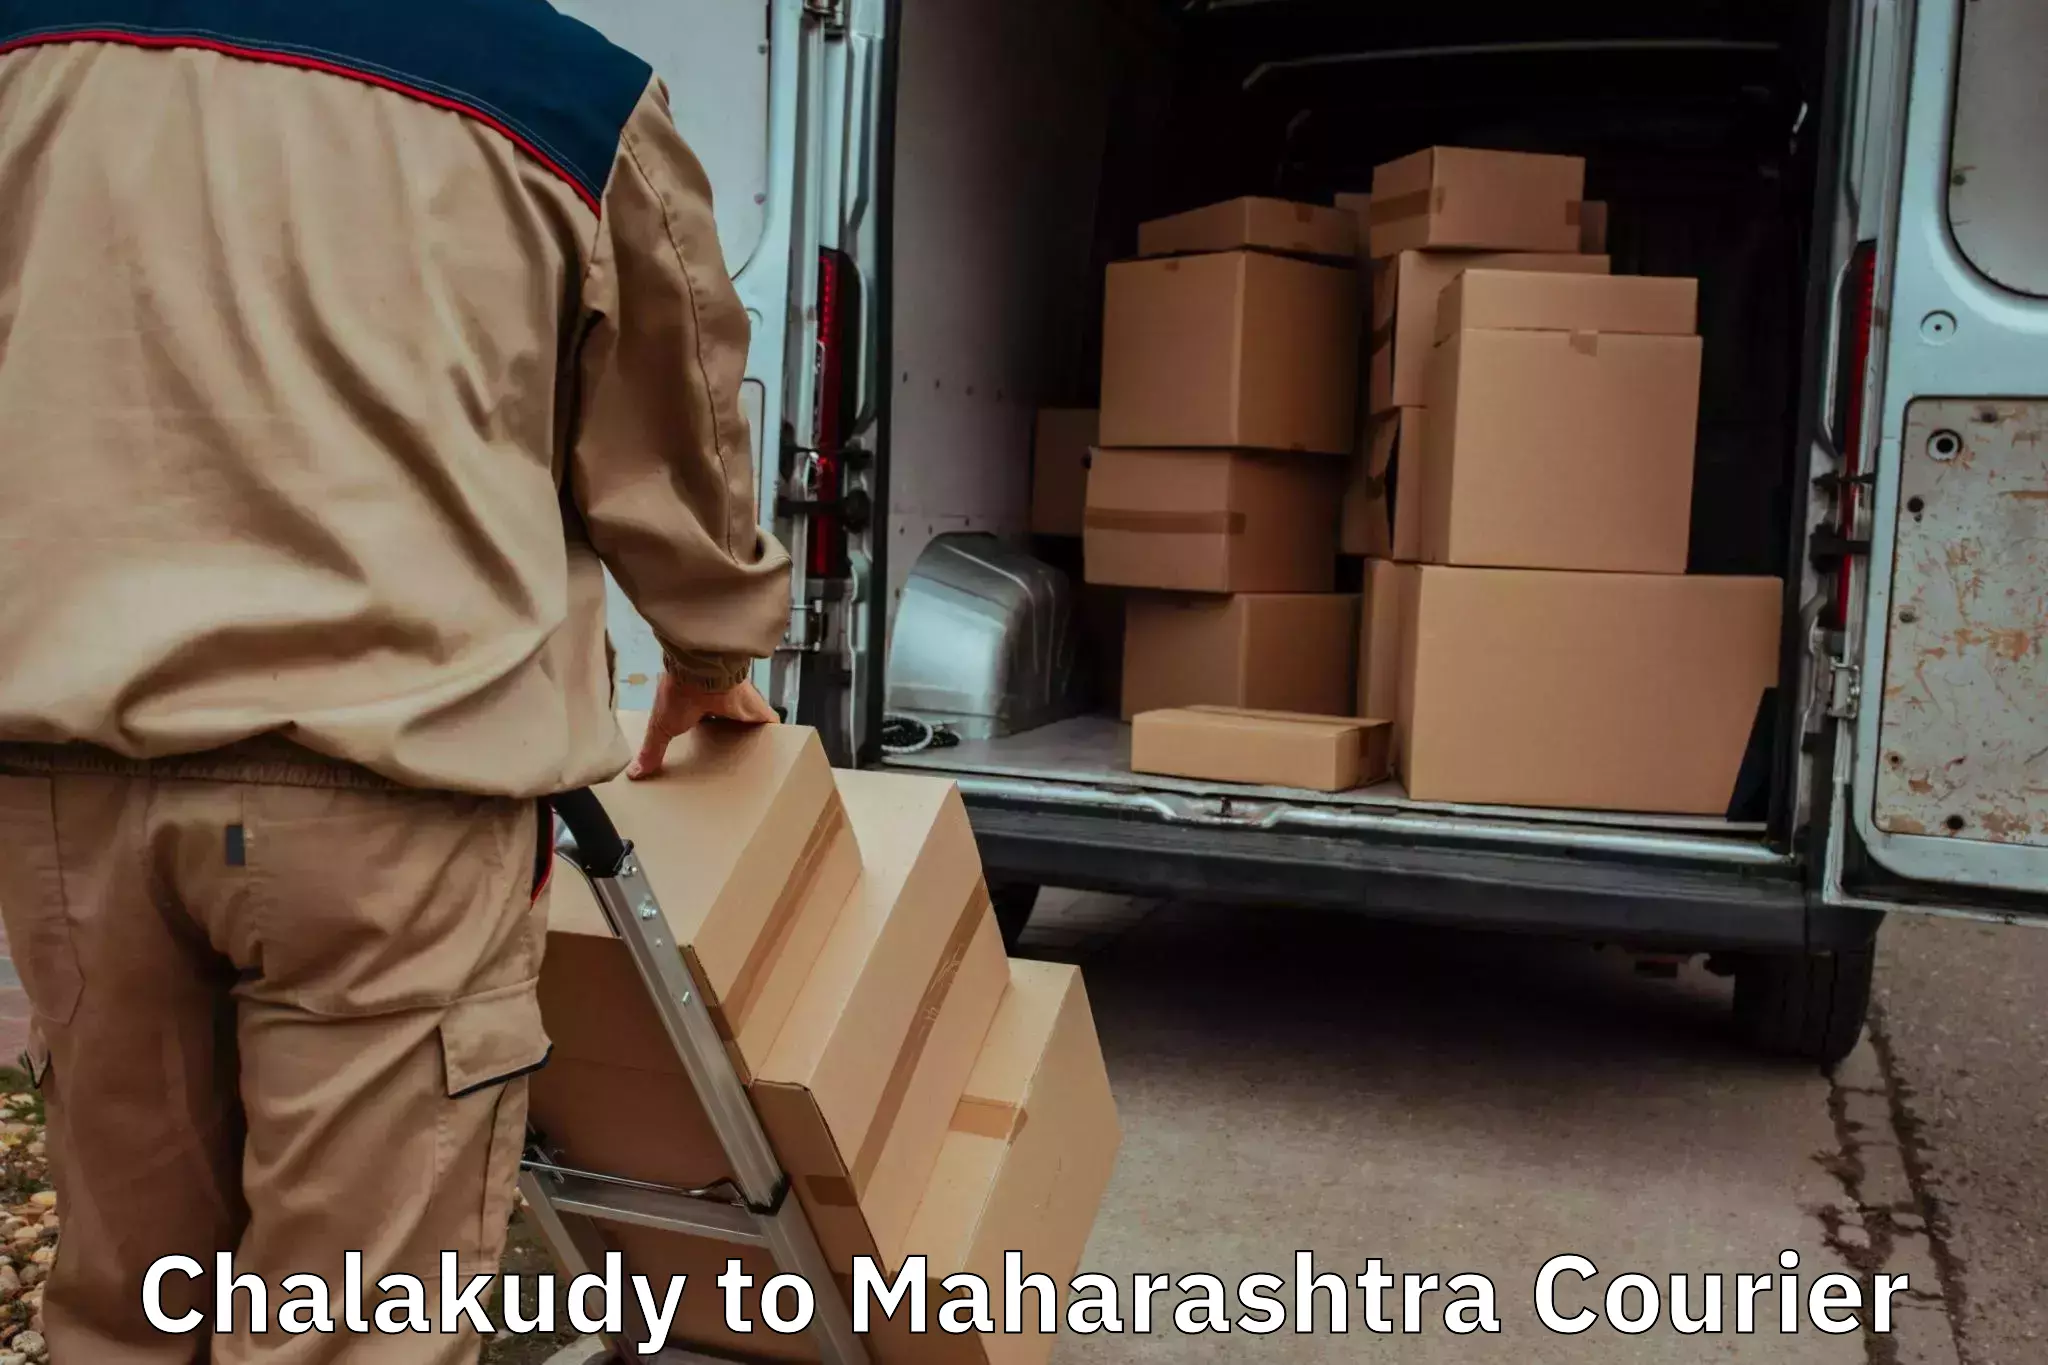 Furniture transport service Chalakudy to IIIT Pune